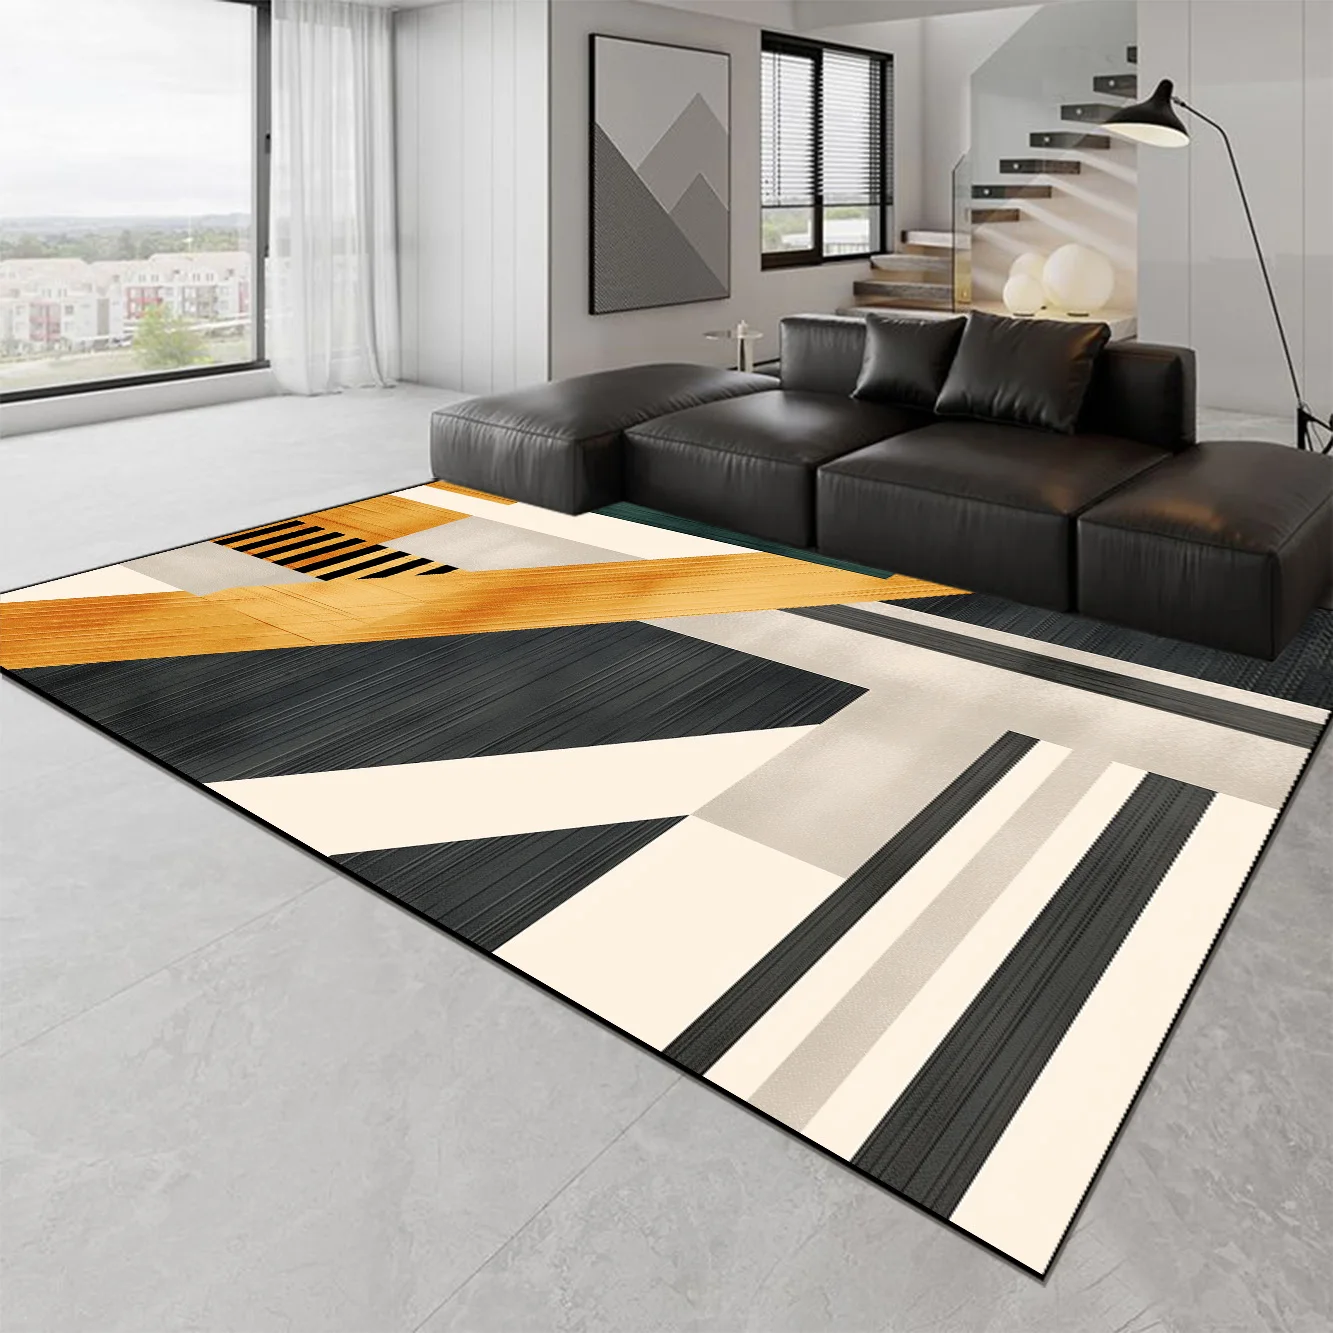 

Nordic Geometry Carpets for Living Room Abstract Bedroom Decoration Rug Luxury Study Decor Rugs Sofa Table Beside Anti-slip Mats